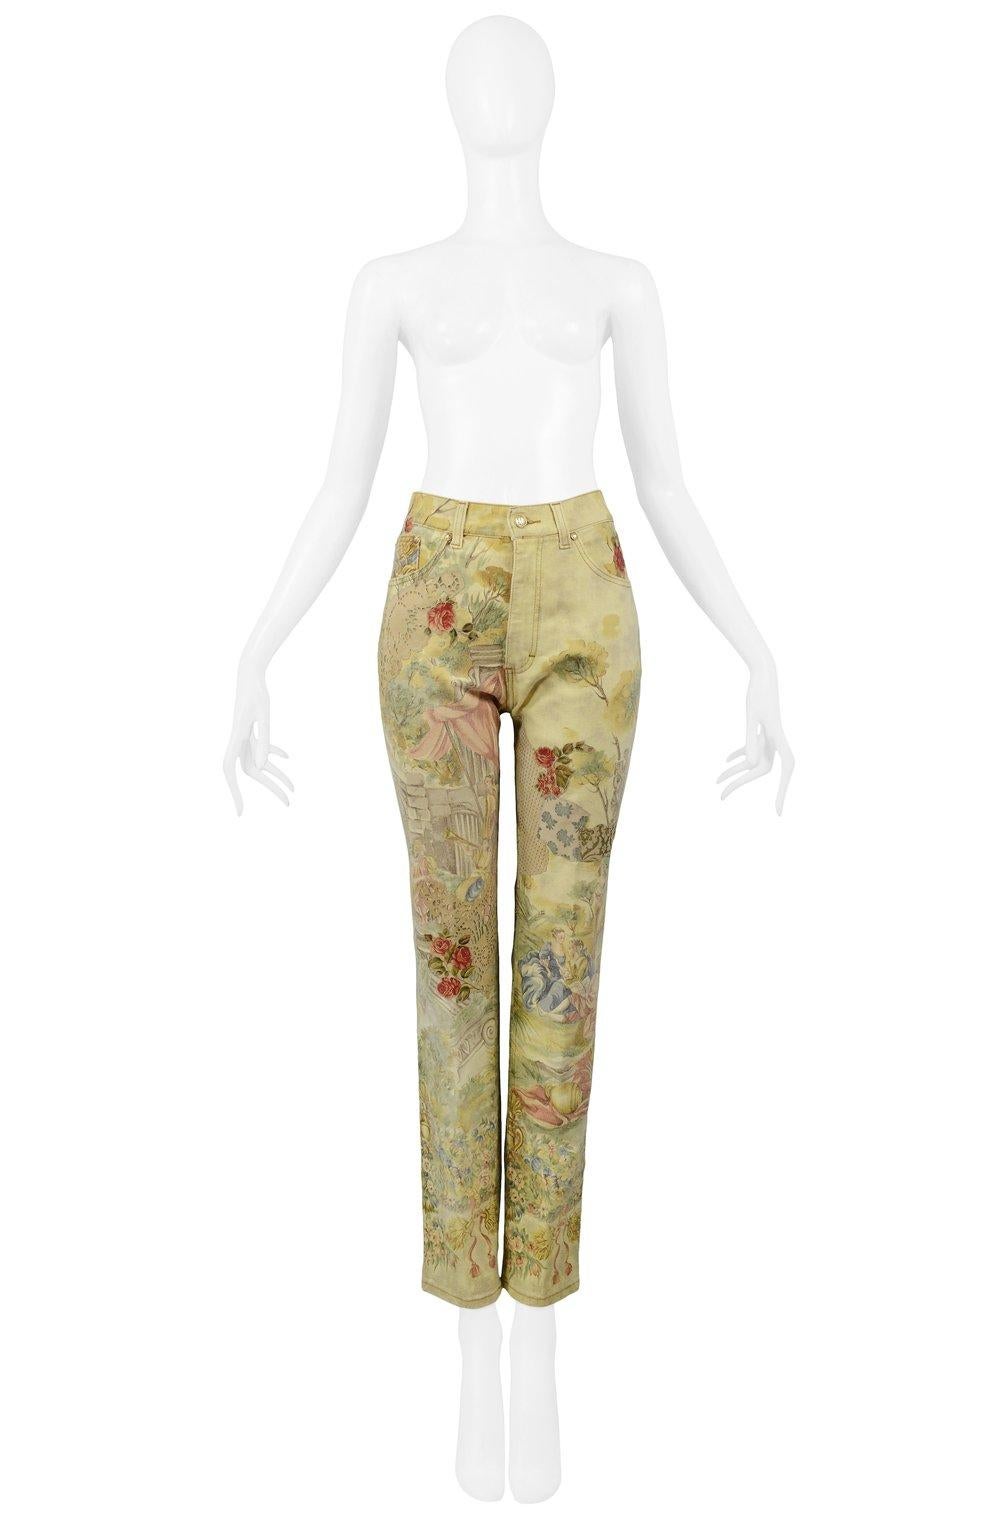 Resurrection is pleased to offer a pair of vintage Roberto Cavalli pale yellow denim high waisted pants with all-over Victorian-style floral and figure print with suede applique patches, center-front zipper with gold-tone hardware, and straight leg